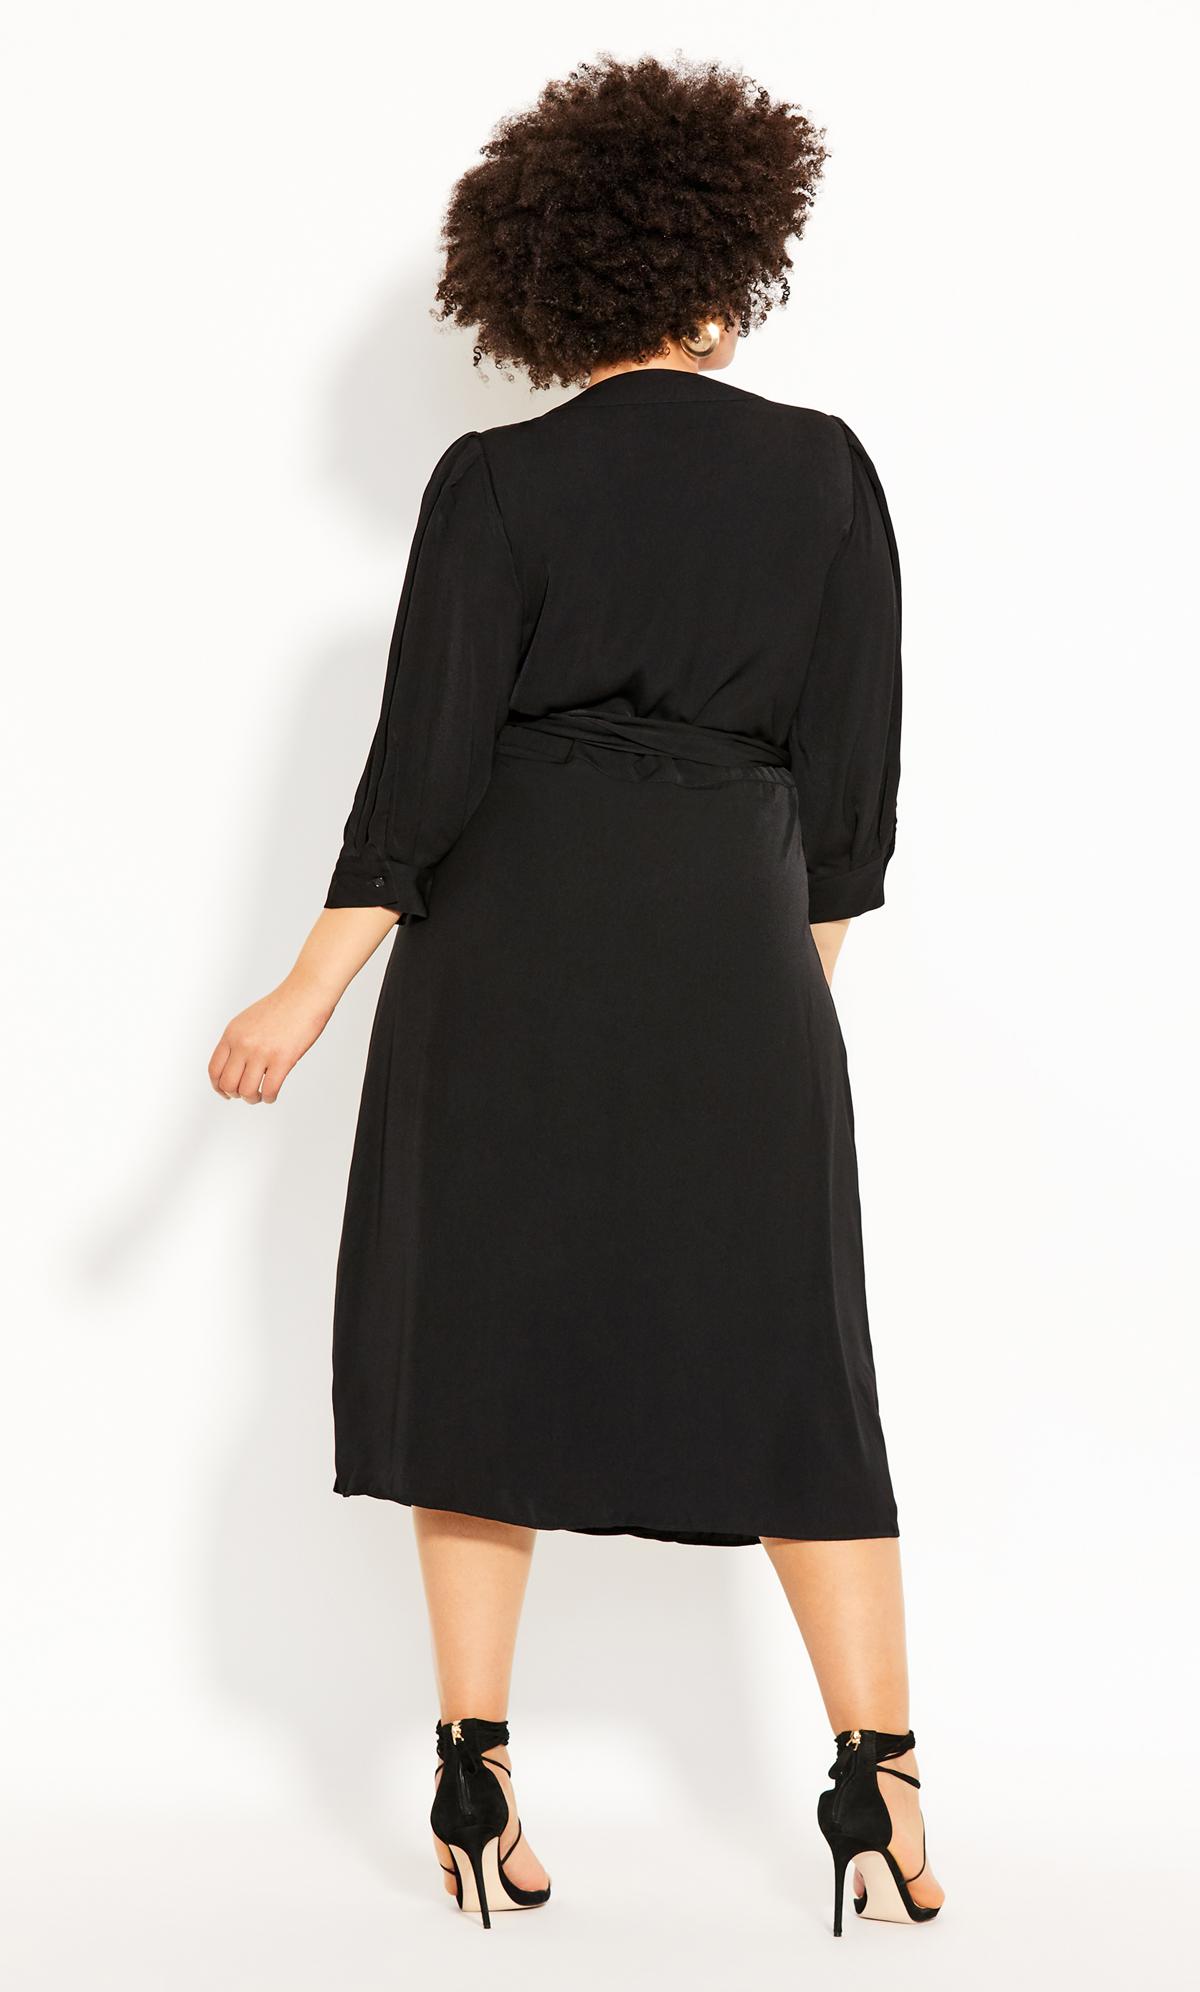 Plus Size Sultry Dress - black 2